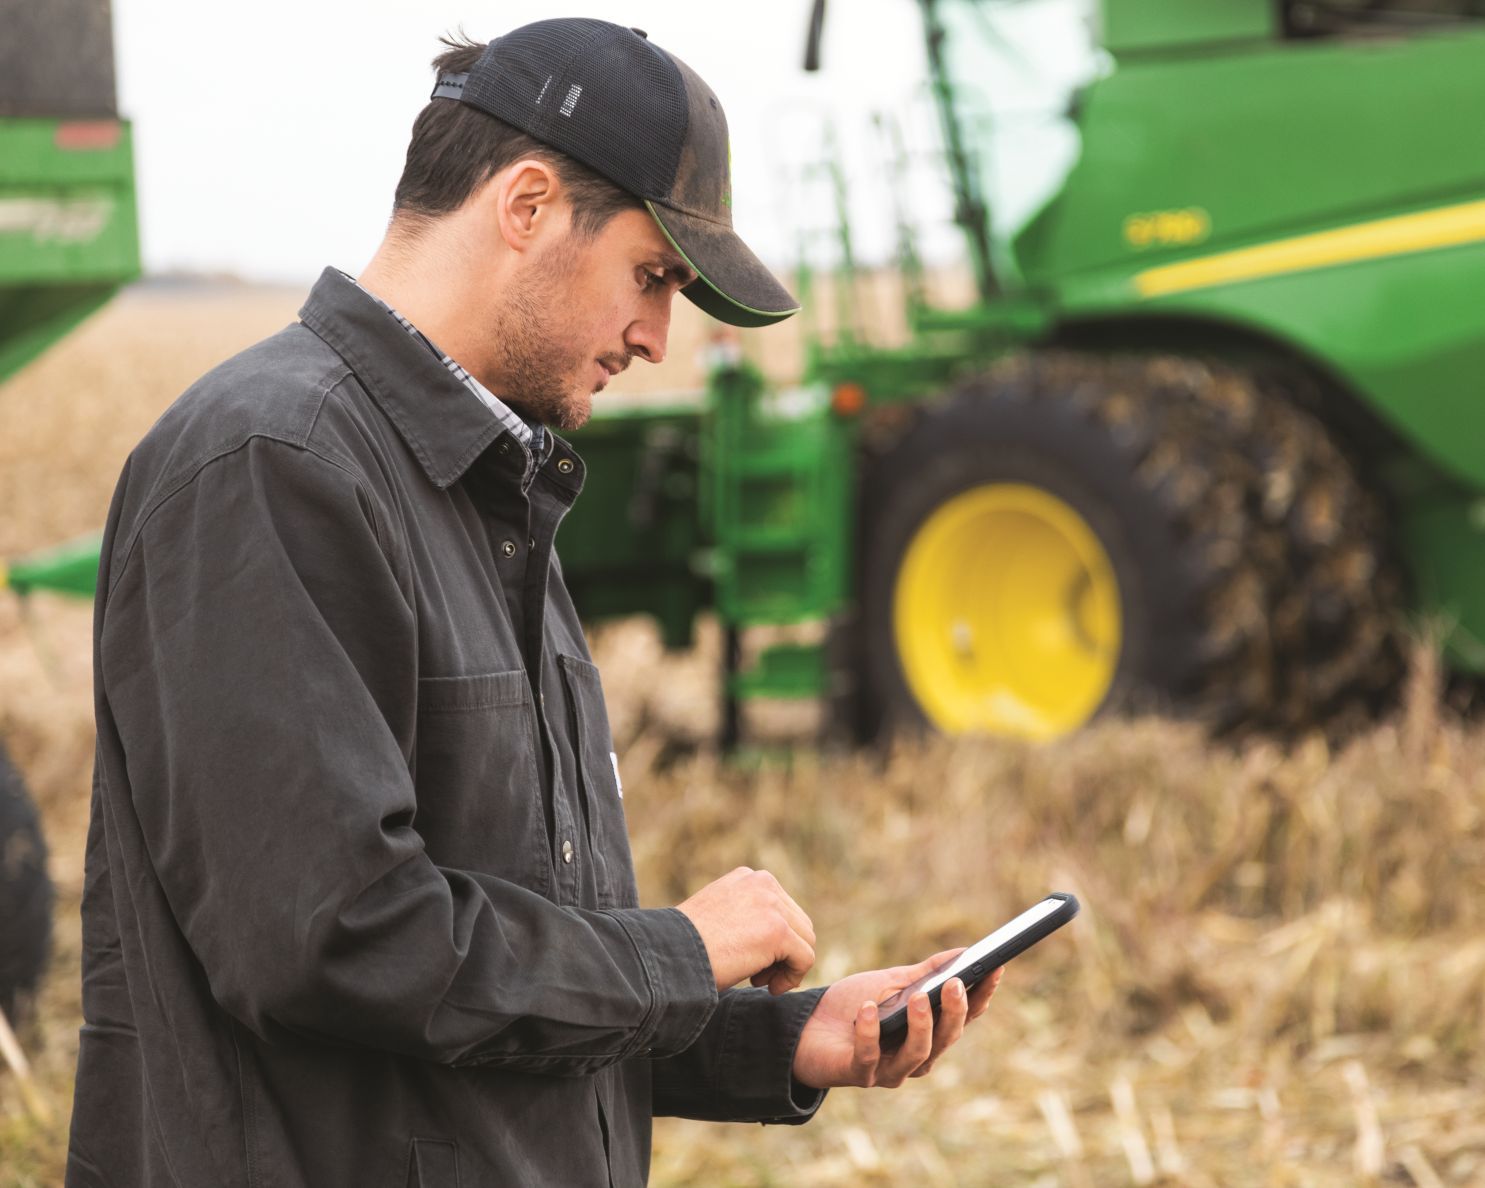 Man looks at a cell phone while standing in a field near a combine harvester